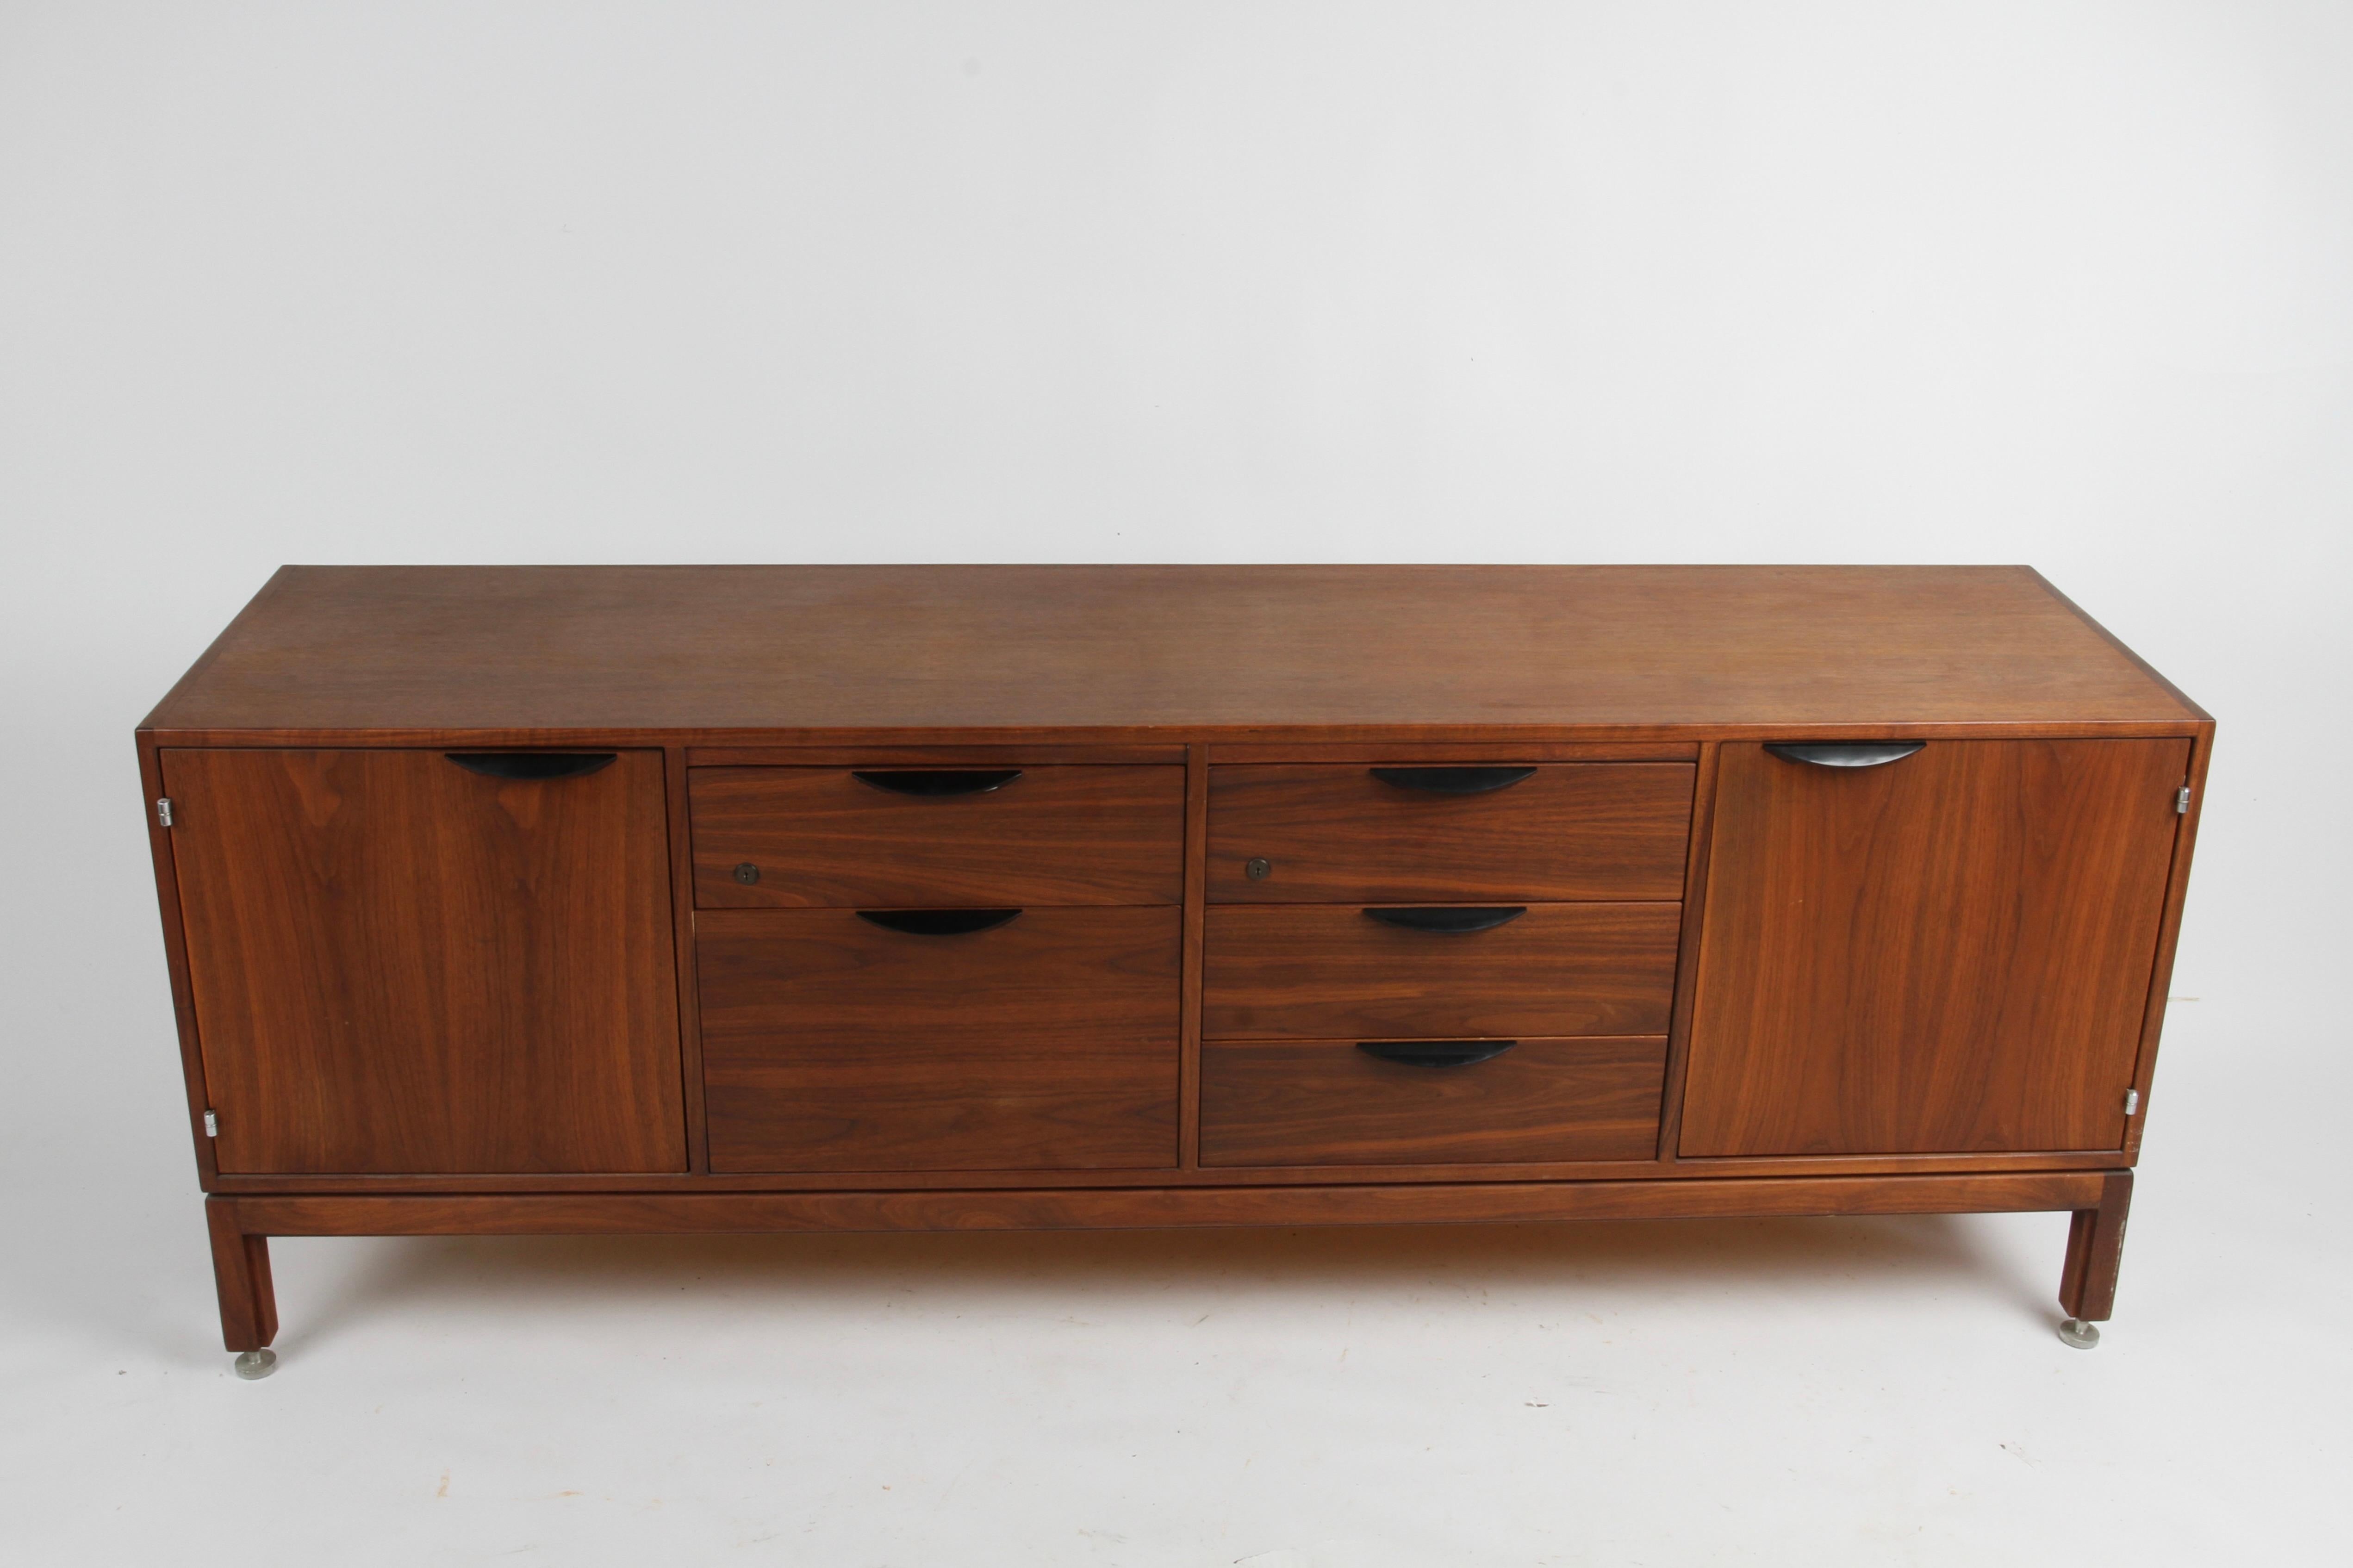 Handsome Jens Risom (1916-2016) designed Danish Modern walnut credenza is perfect for office or home. Designed and produced by Jens Risom Inc in the late 1950s or early 1960s. The richly grained walnut case comprises of two cabinets with adjustable